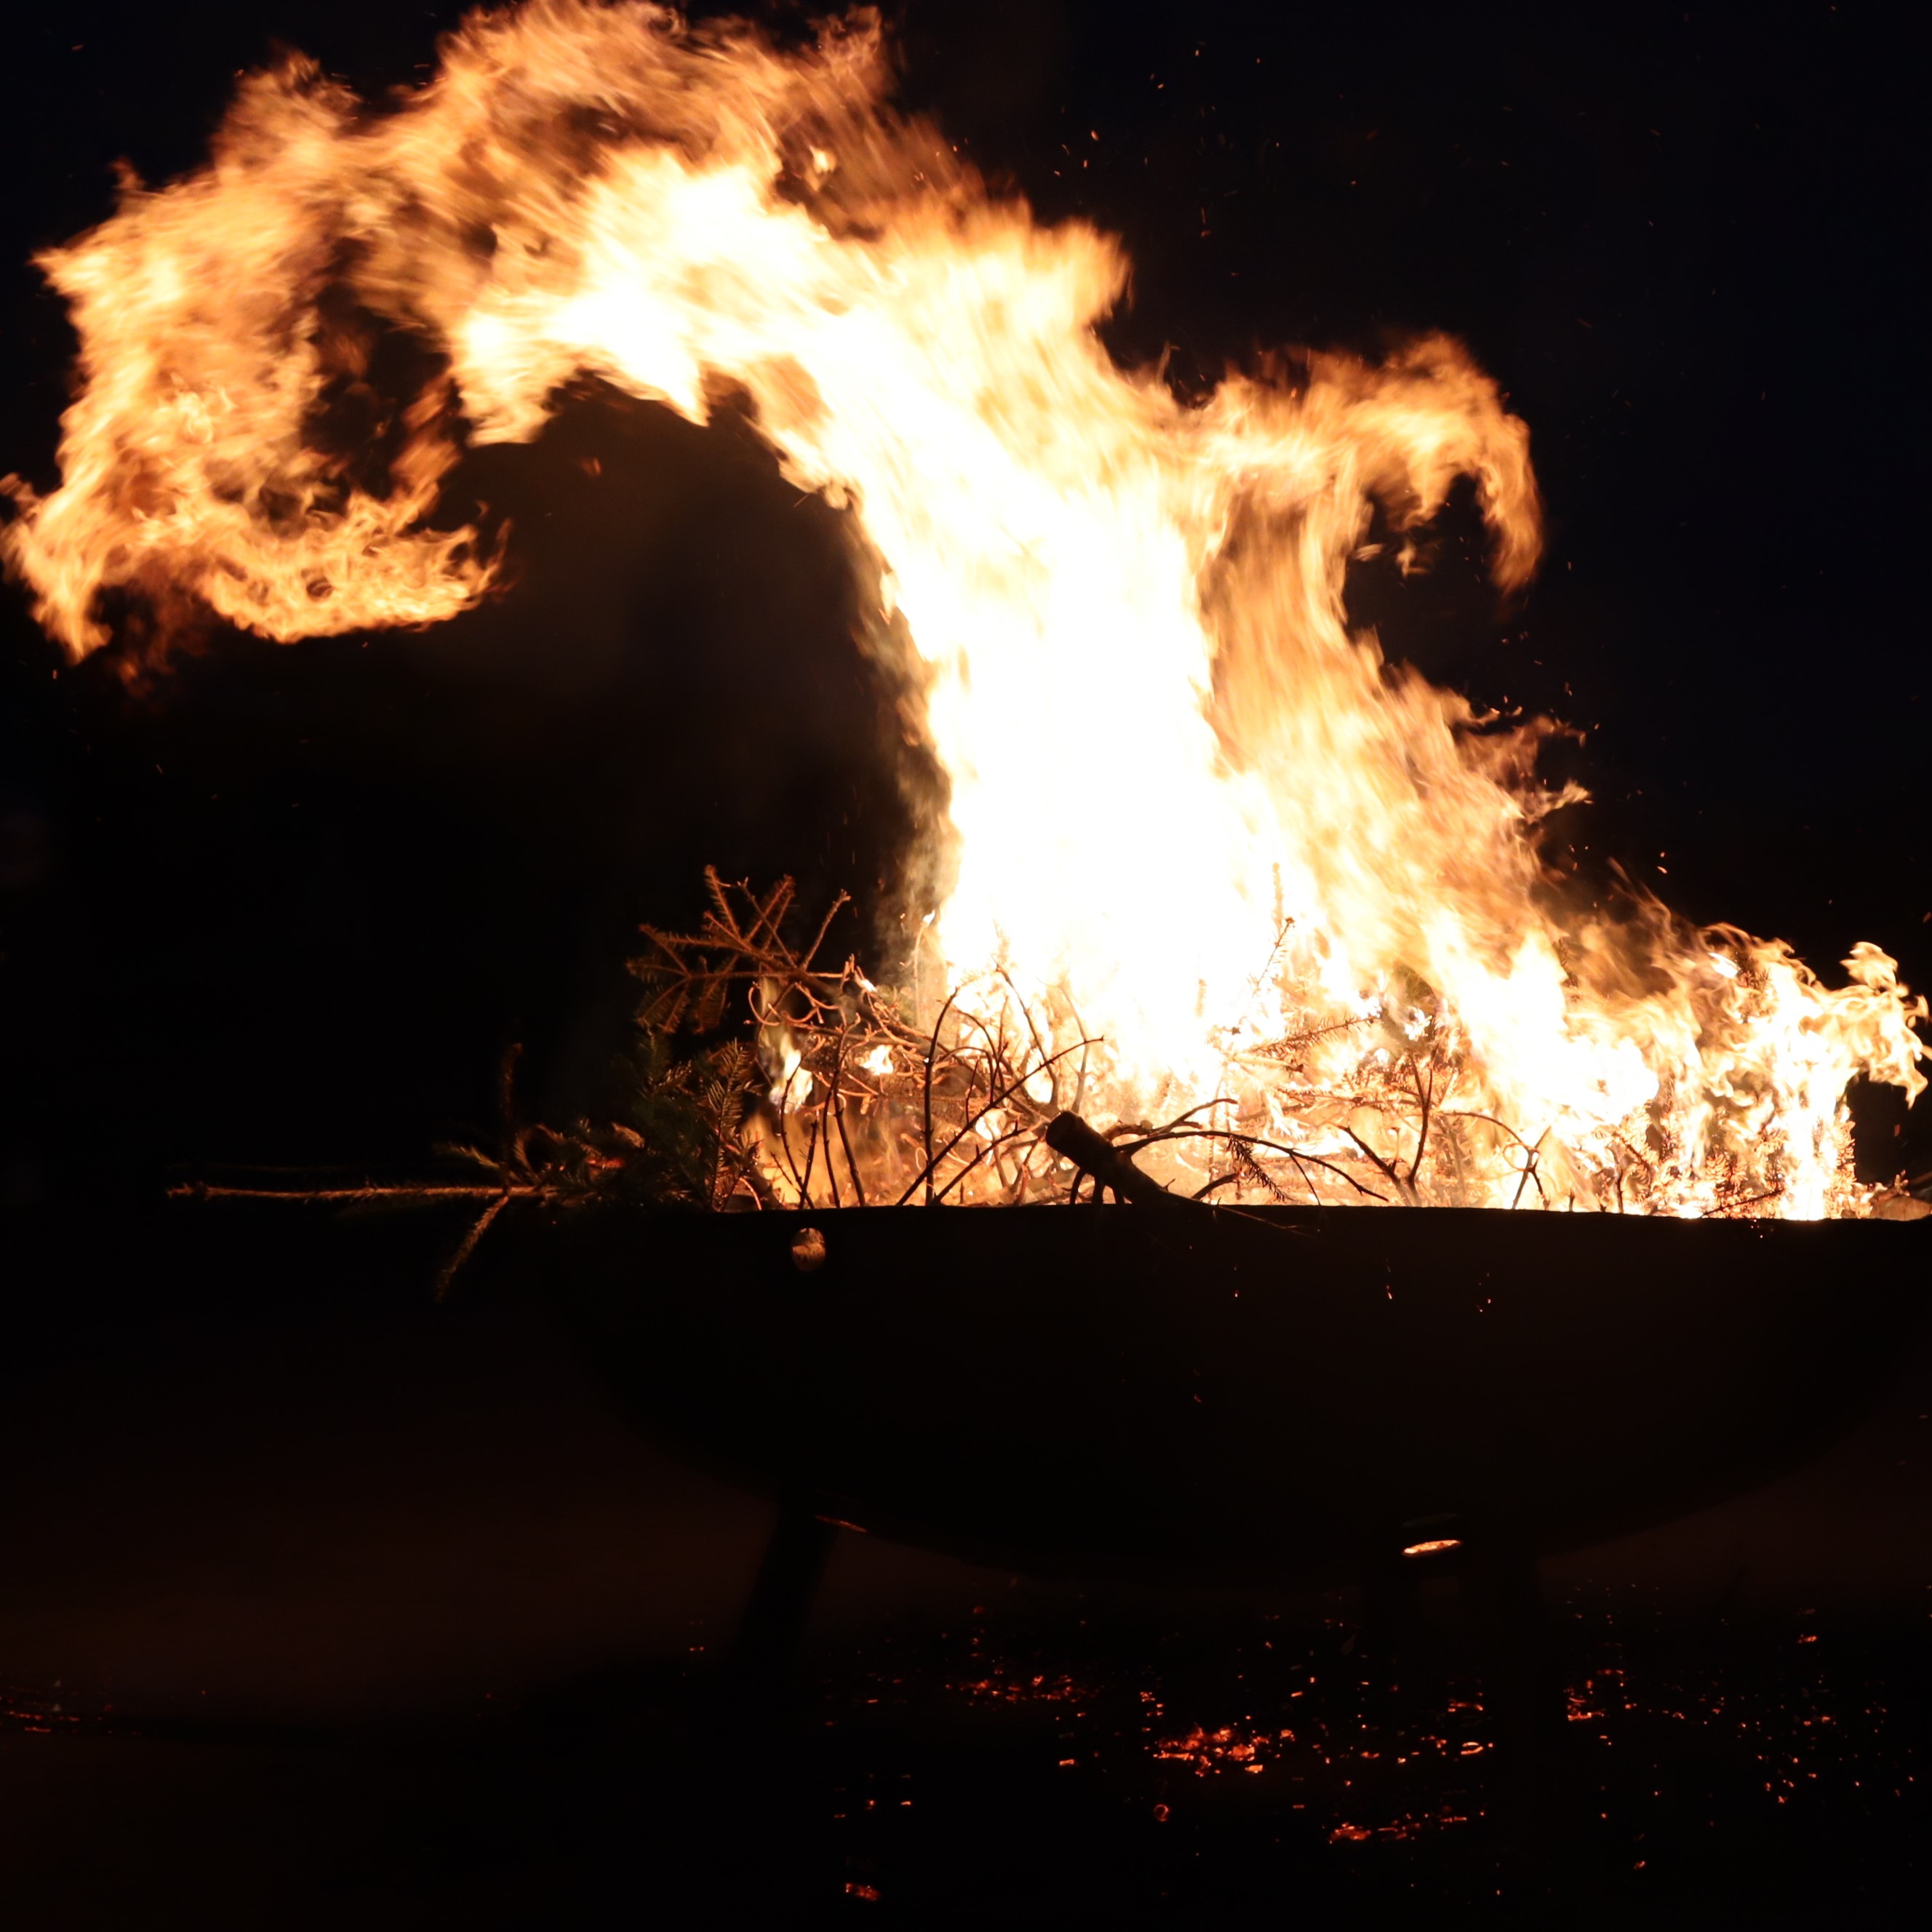 Burning fire bowl with high flames.